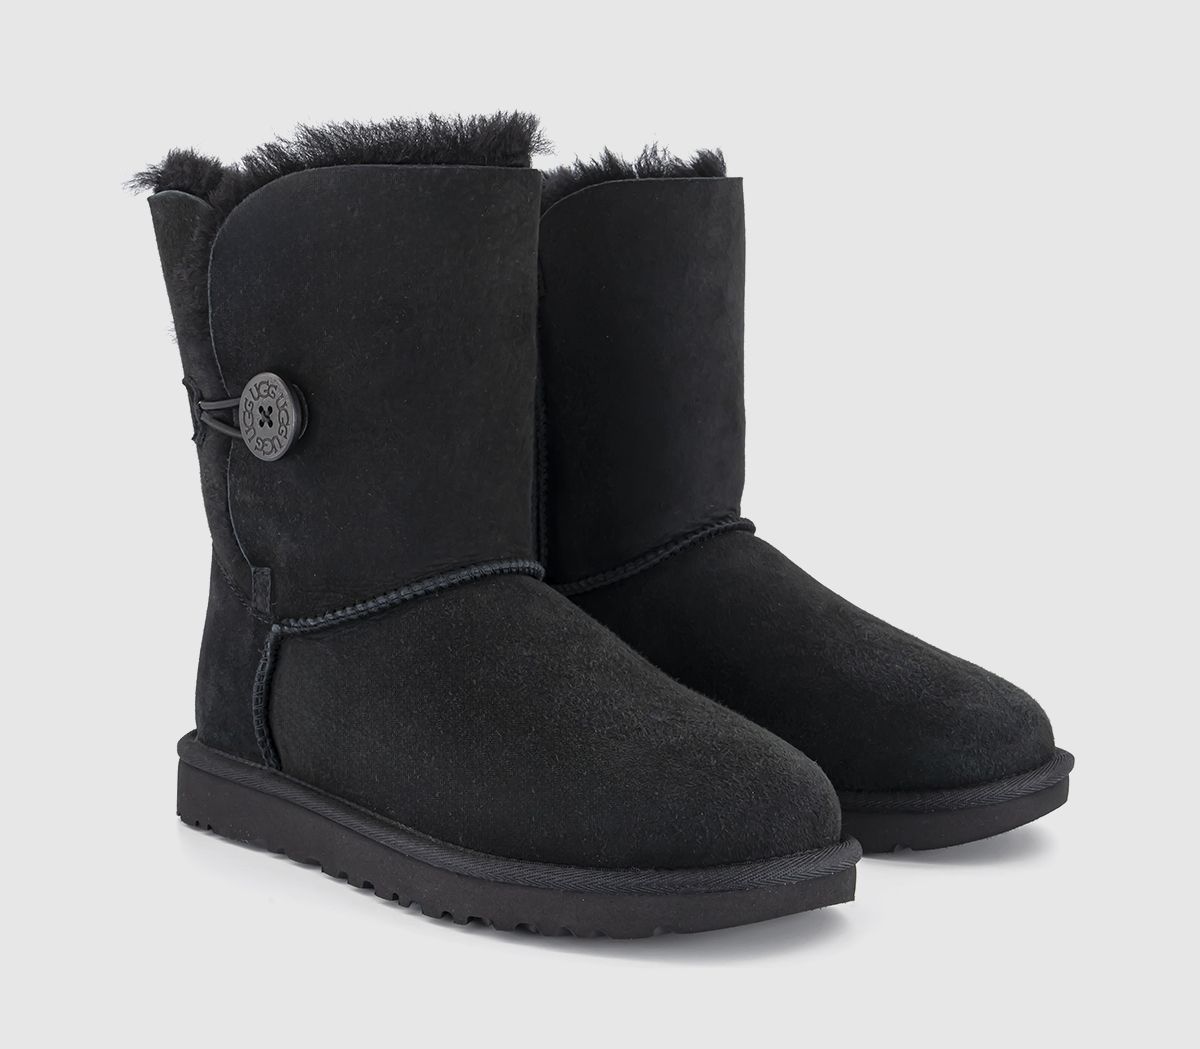 UGG Bailey Button II Boots Black Suede - Ankle Boots